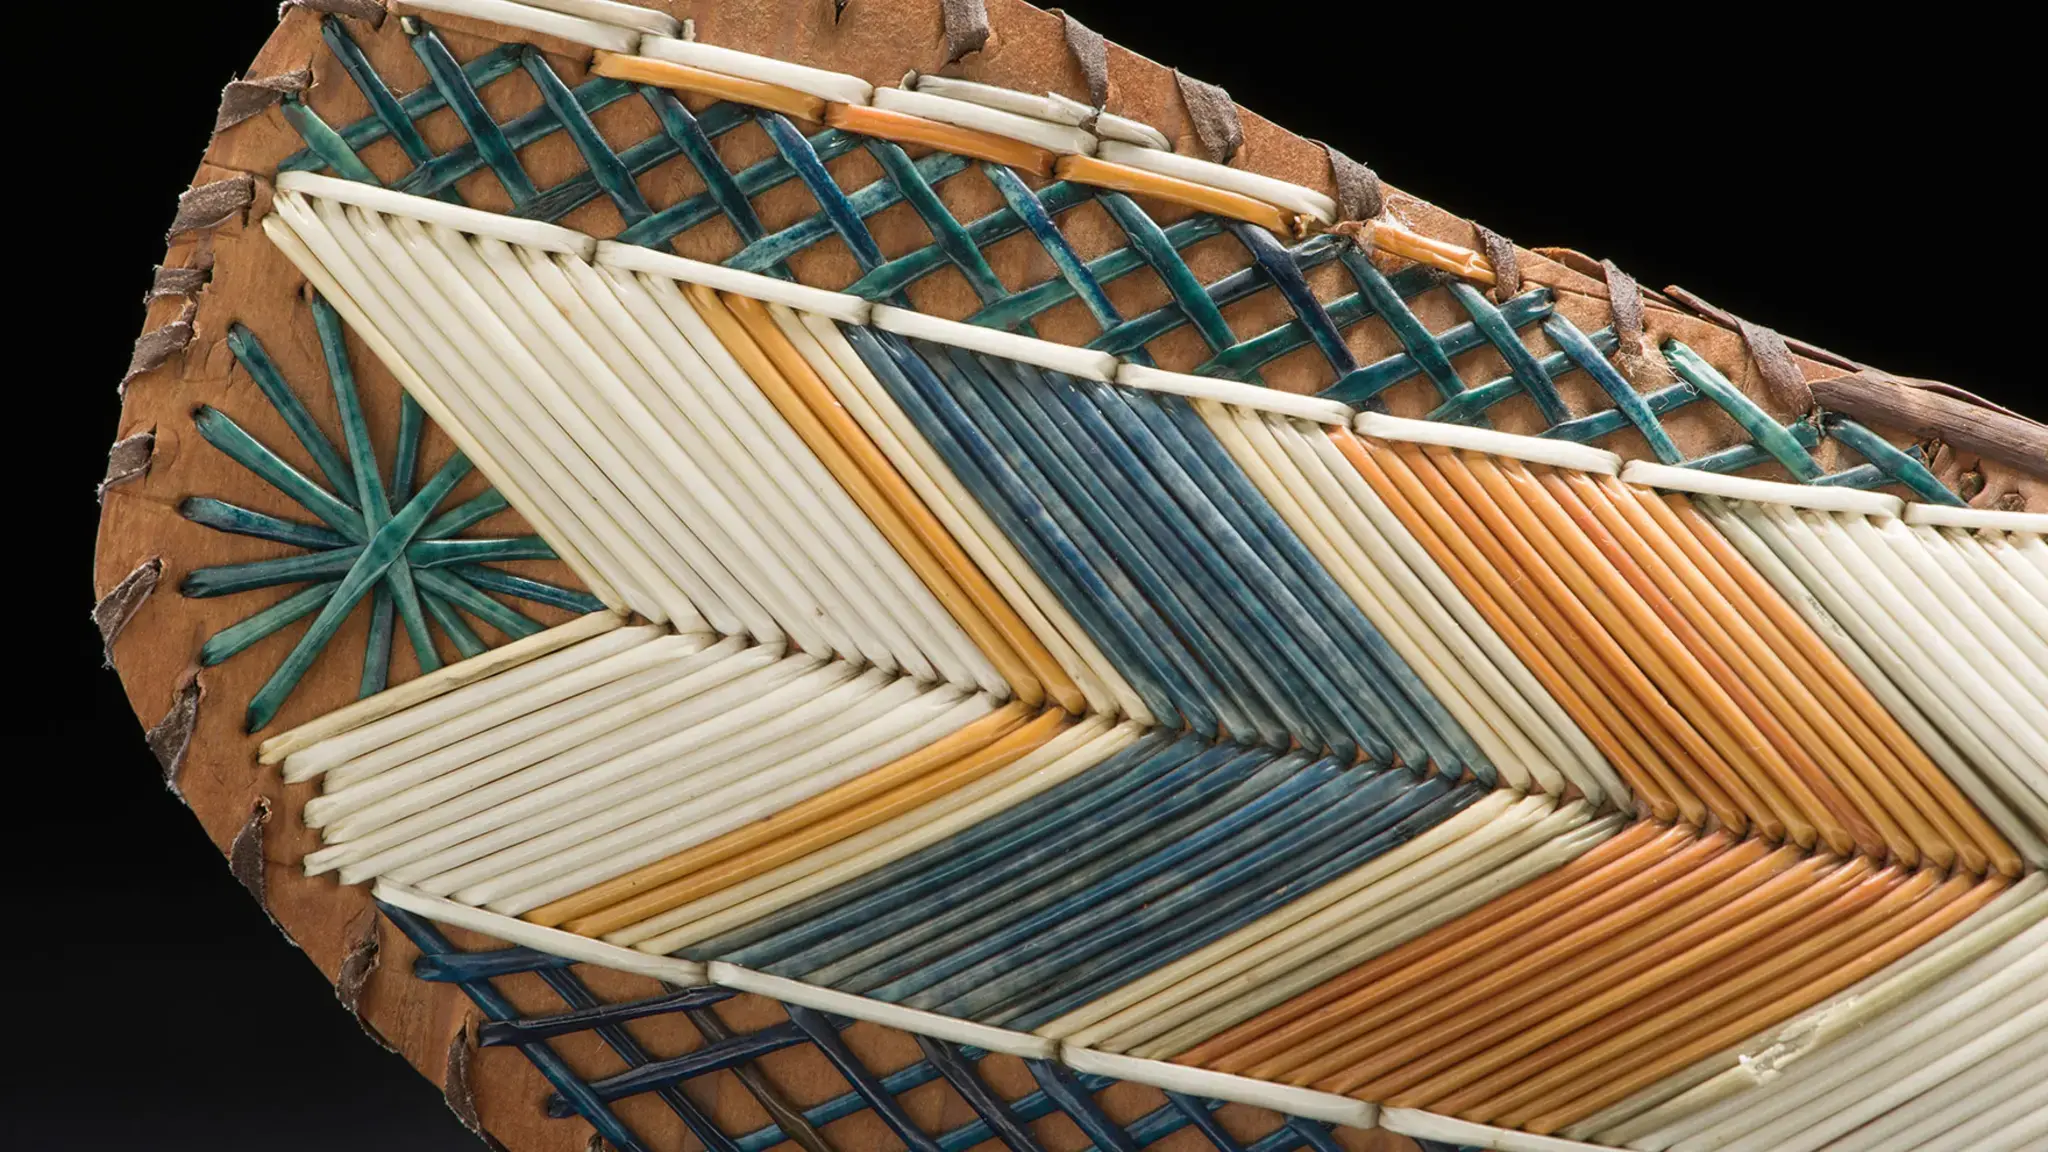 Detail of a model canoe, on view at the Abbe Museum in Bar Harbor, Maine. Photo courtesy Peabody Essex Museum.